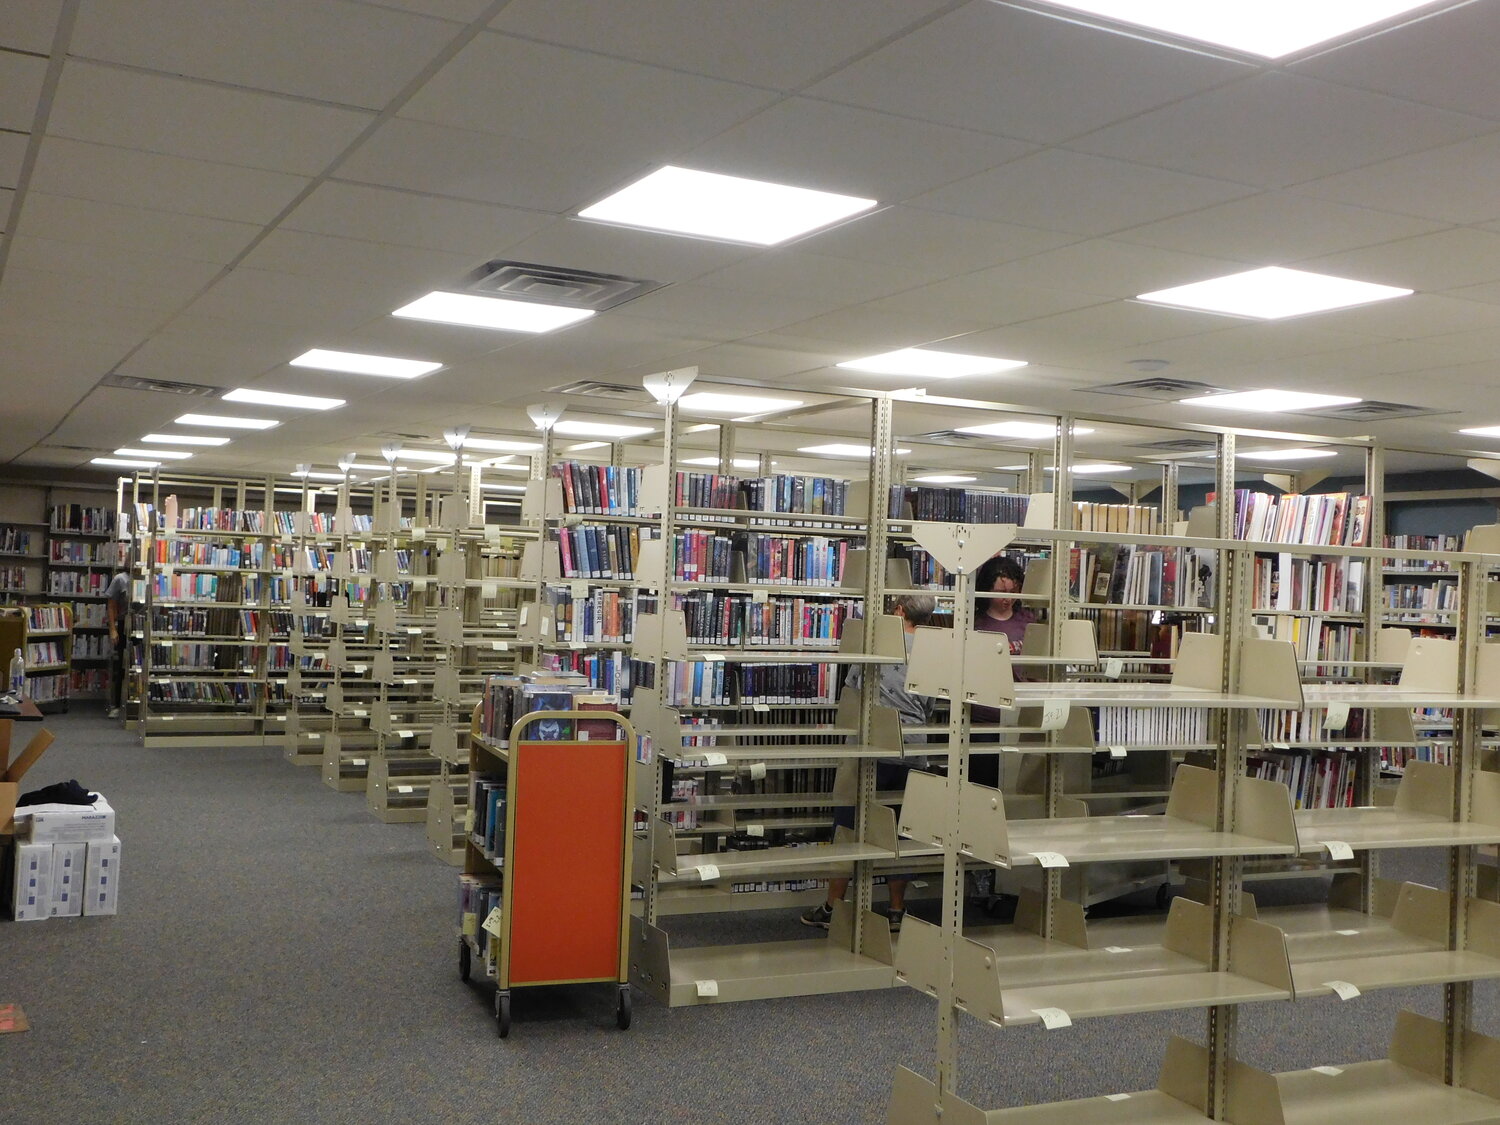 Shelving awaits books during the library move to their new building.